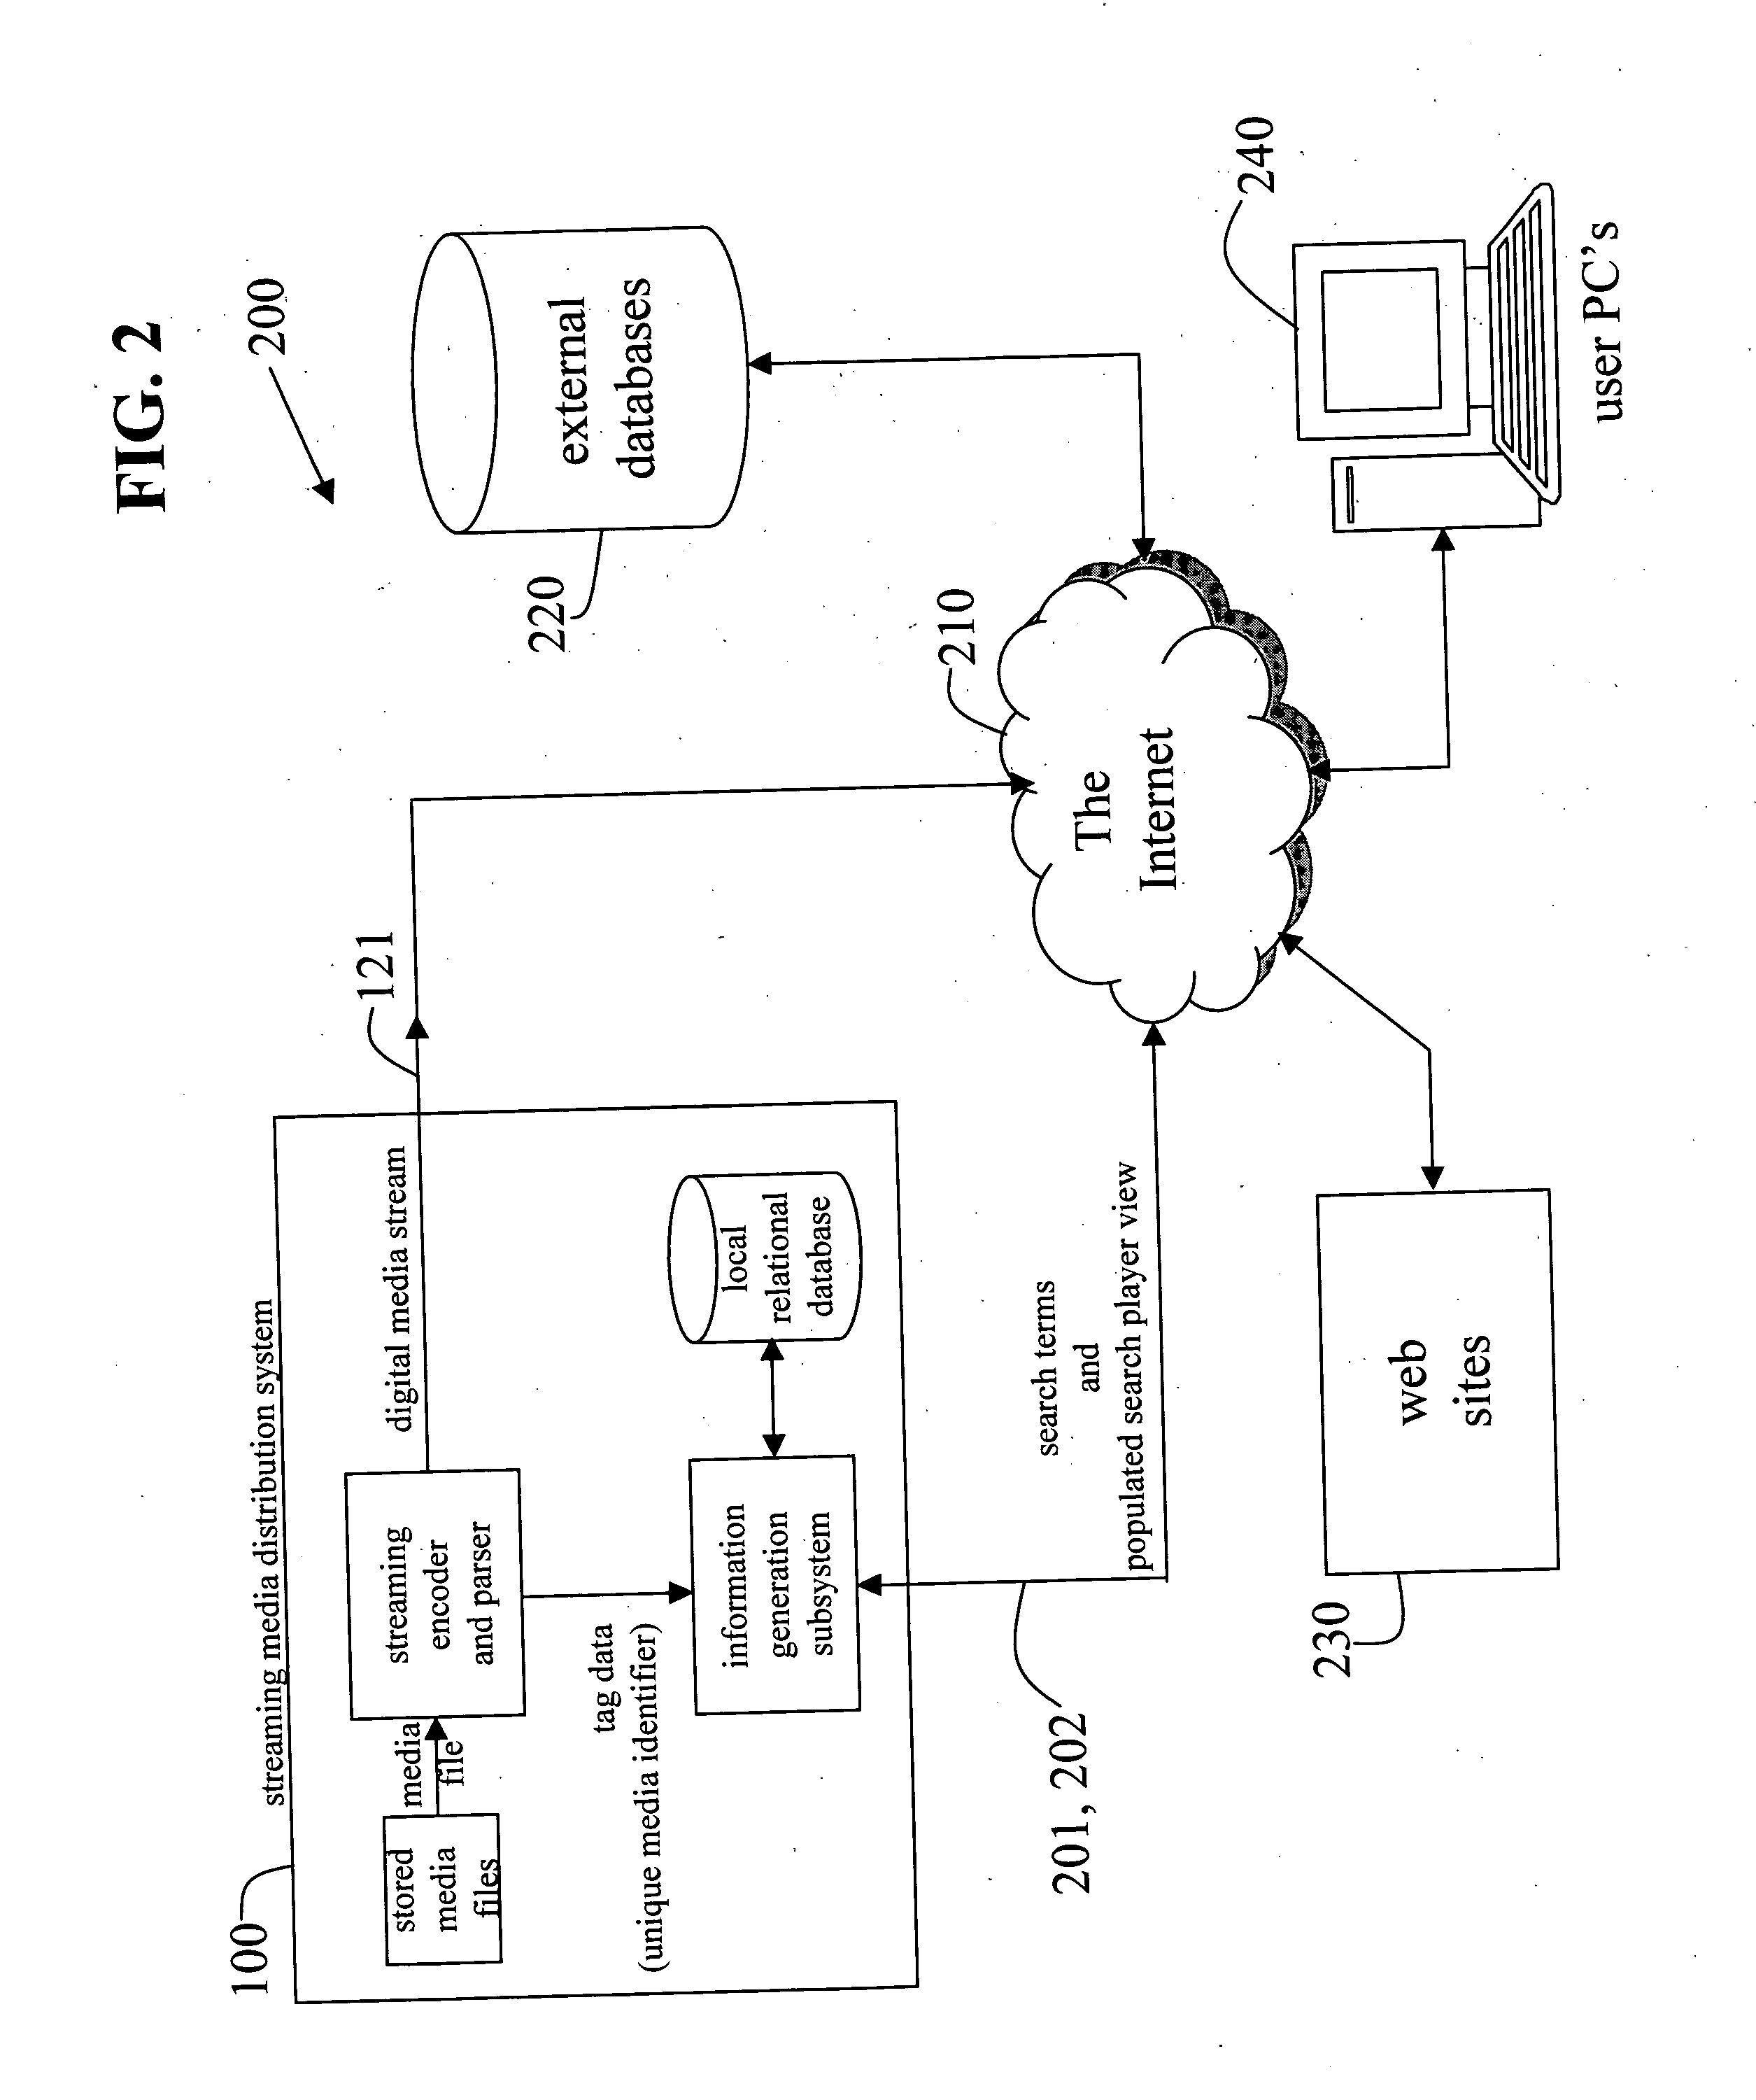 Systems and methods to provide internet search/play media services